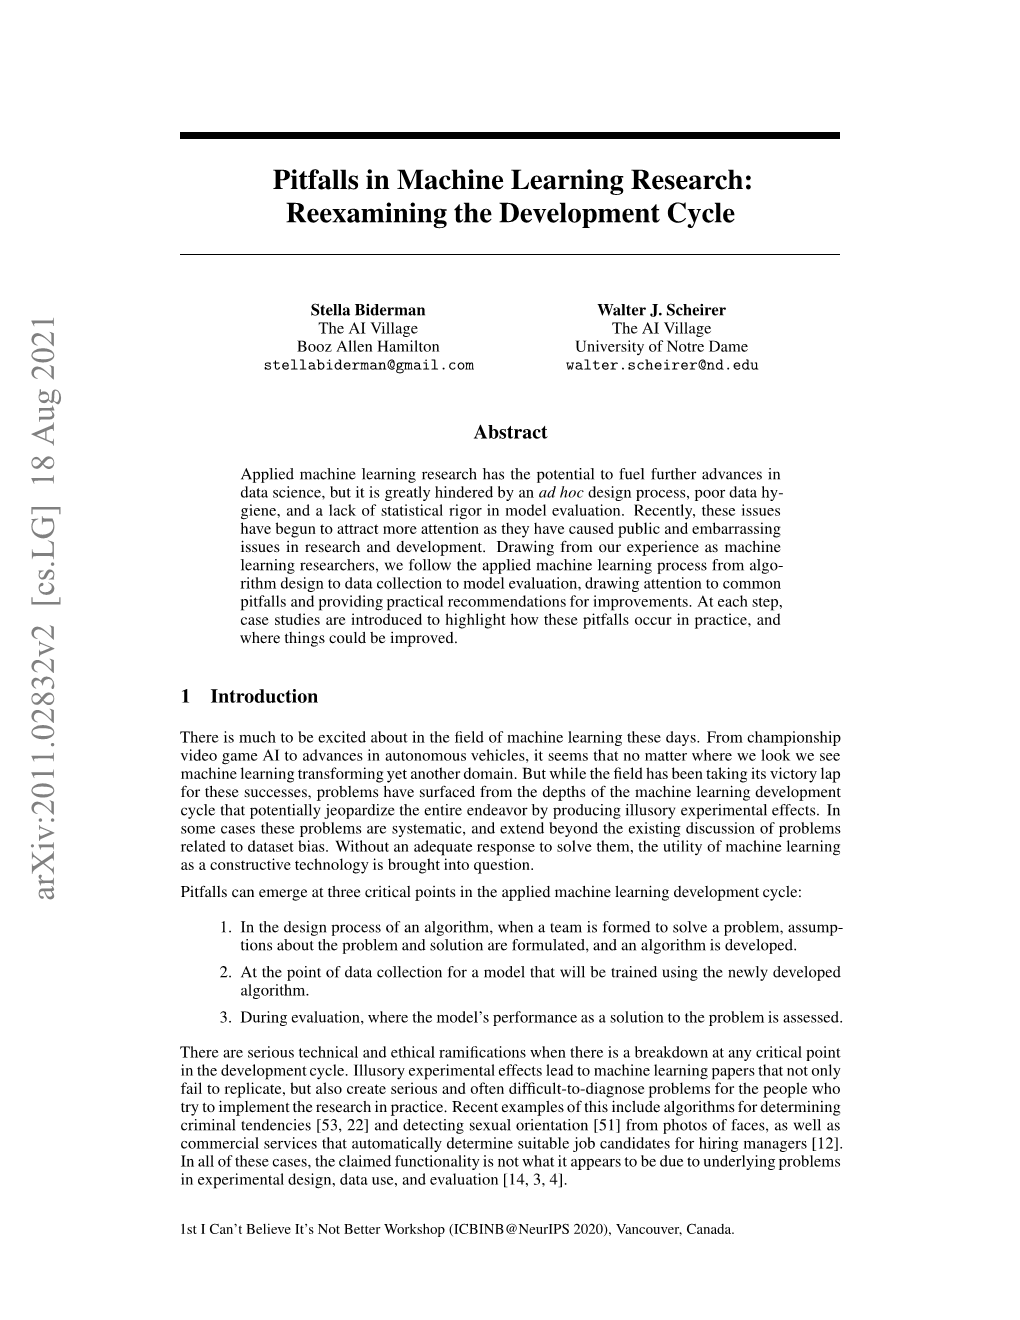 Pitfalls in Machine Learning Research